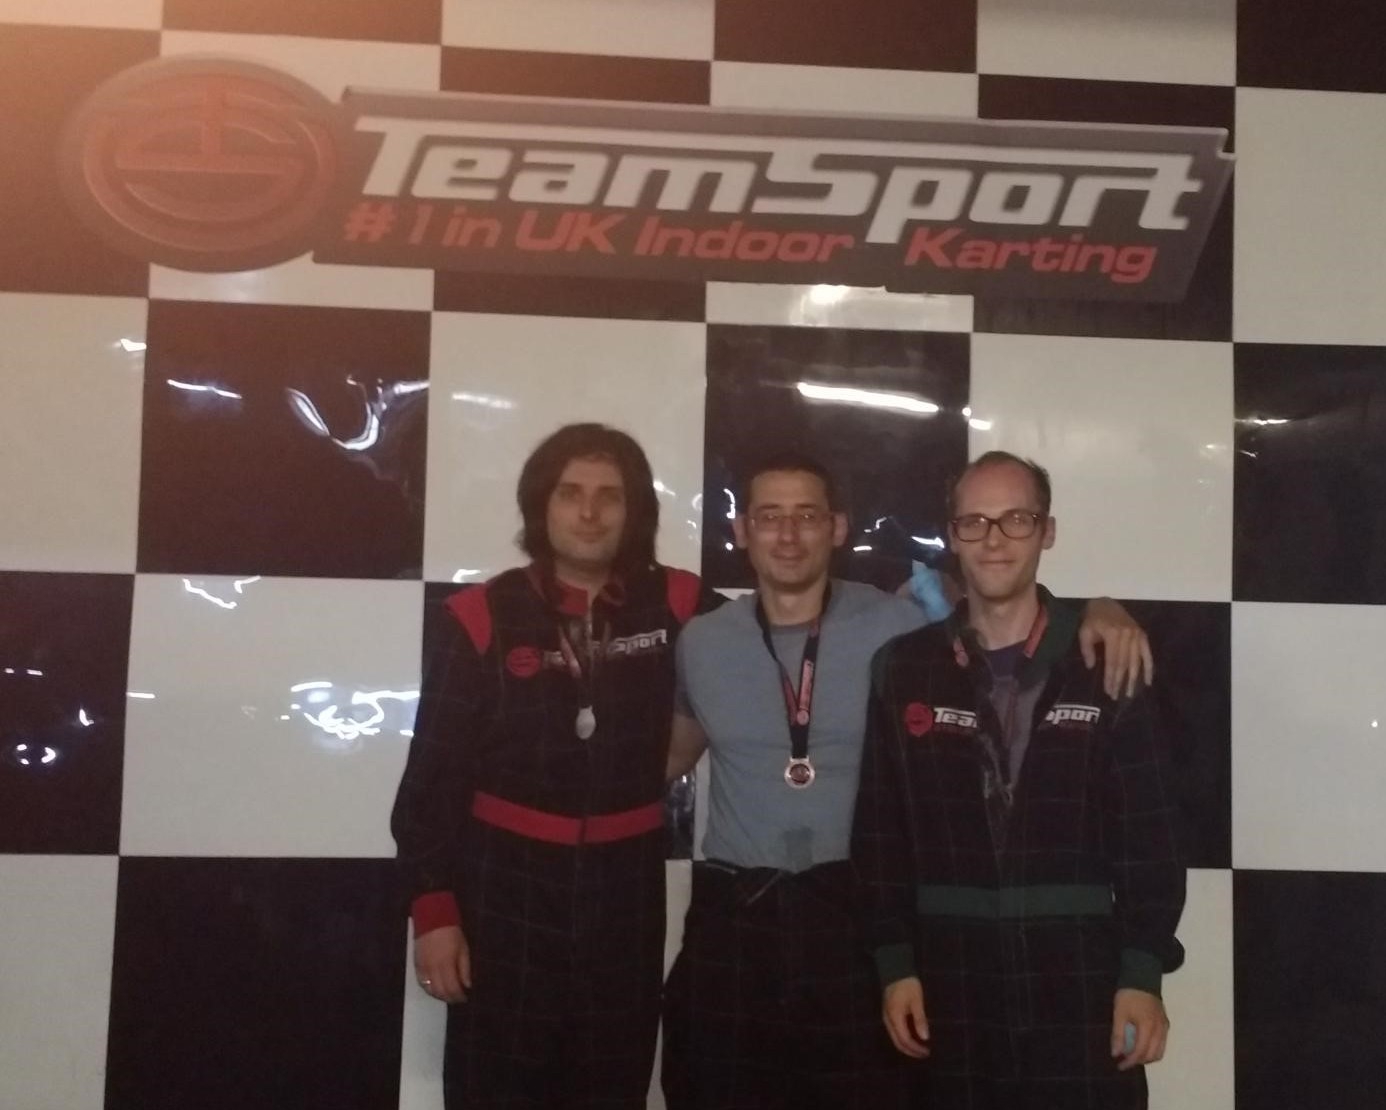 Three people in karting attire arm to arm standing in front of a sign that saus Team Sport #1 in UK Indoor Karting